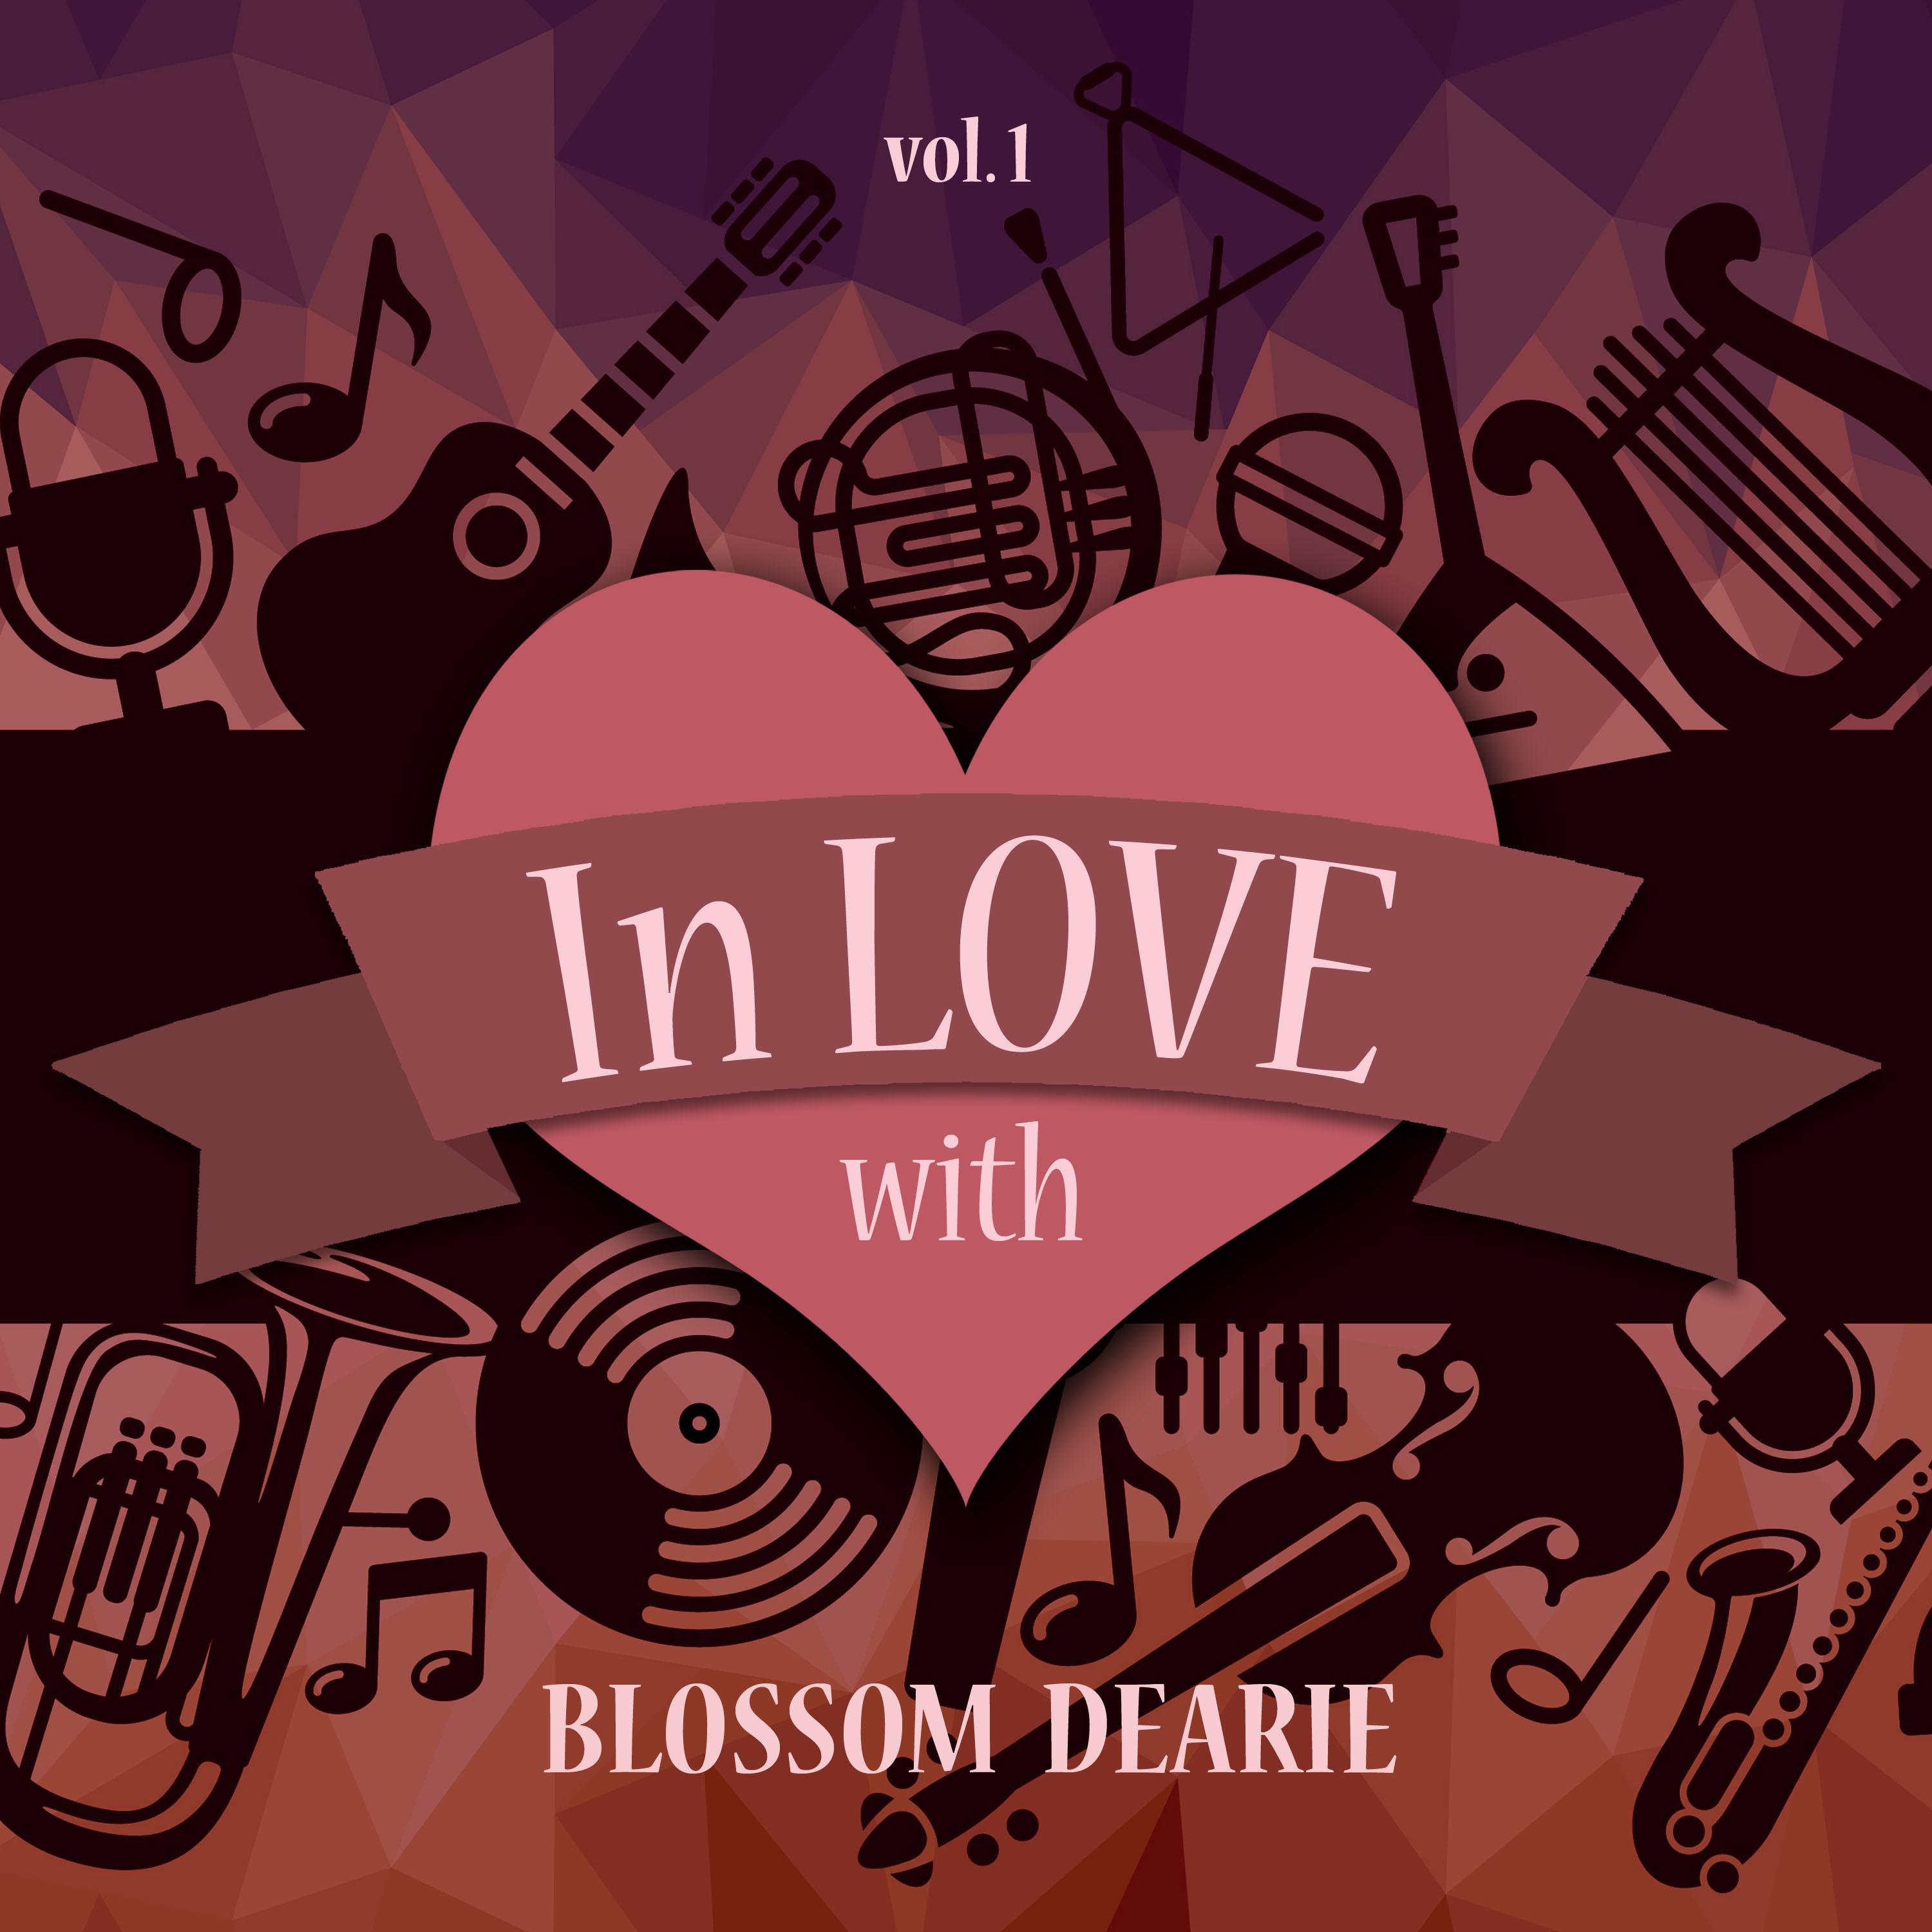 In Love with Blossom Dearie, Vol. 1